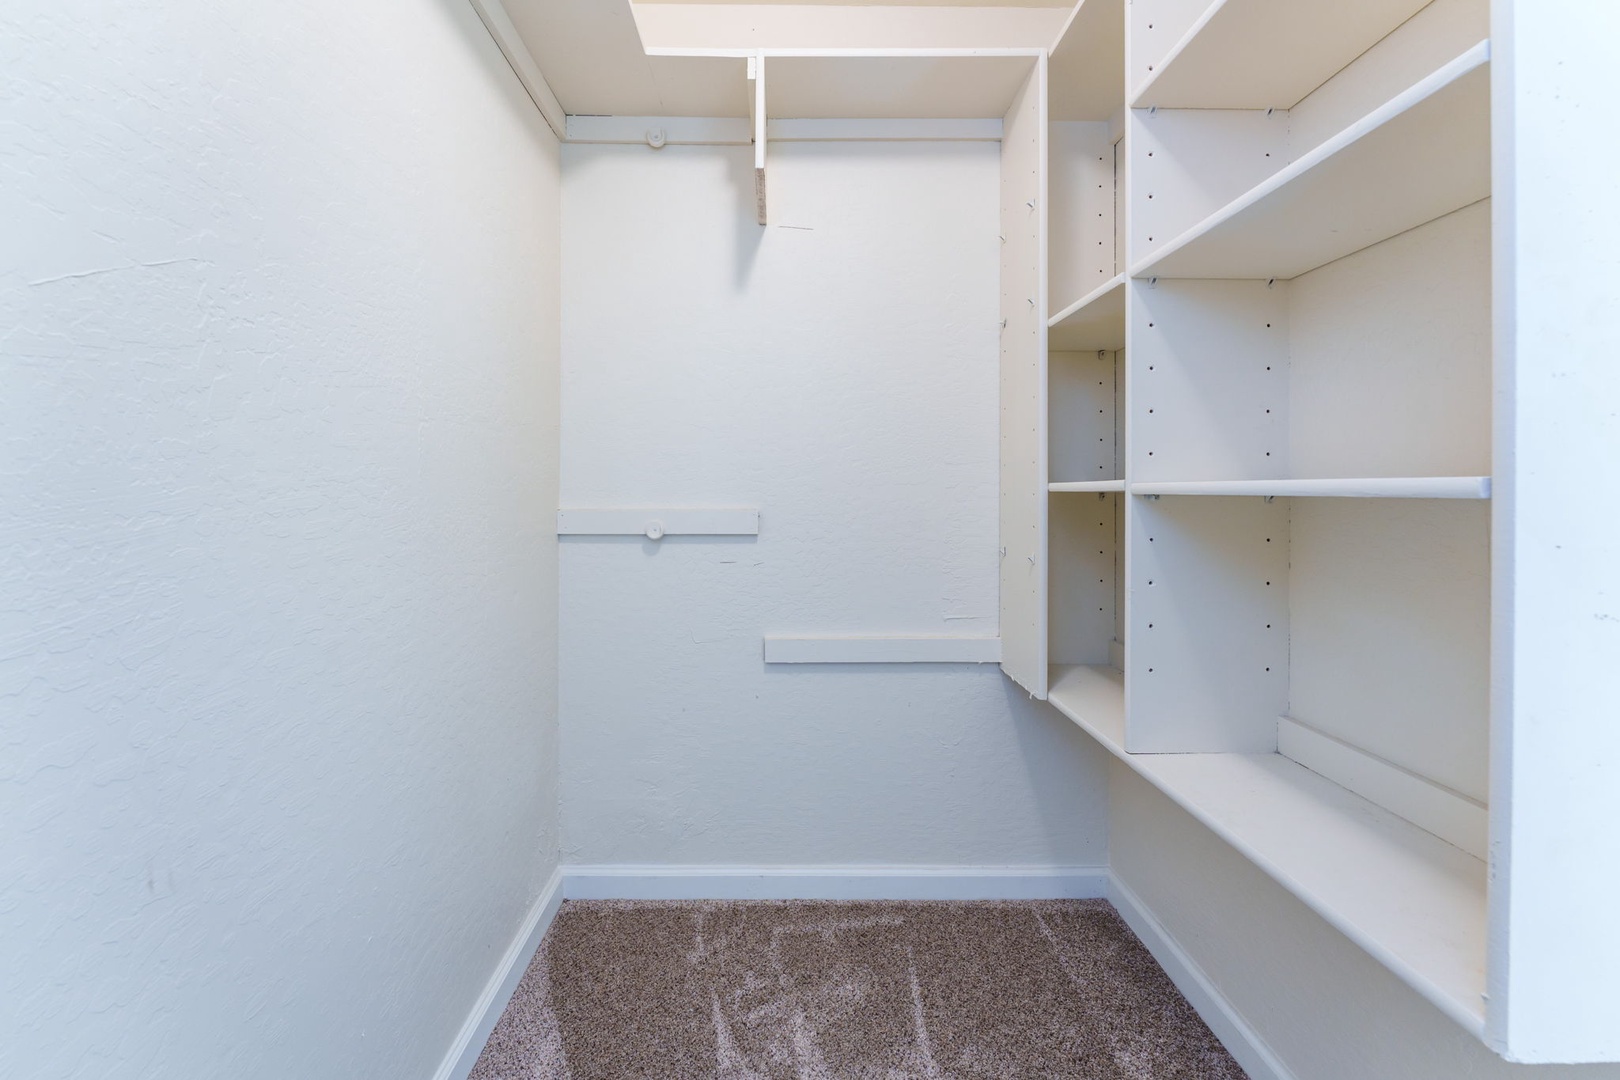 There will be no need to fight over closet space in any of this home’s bedrooms